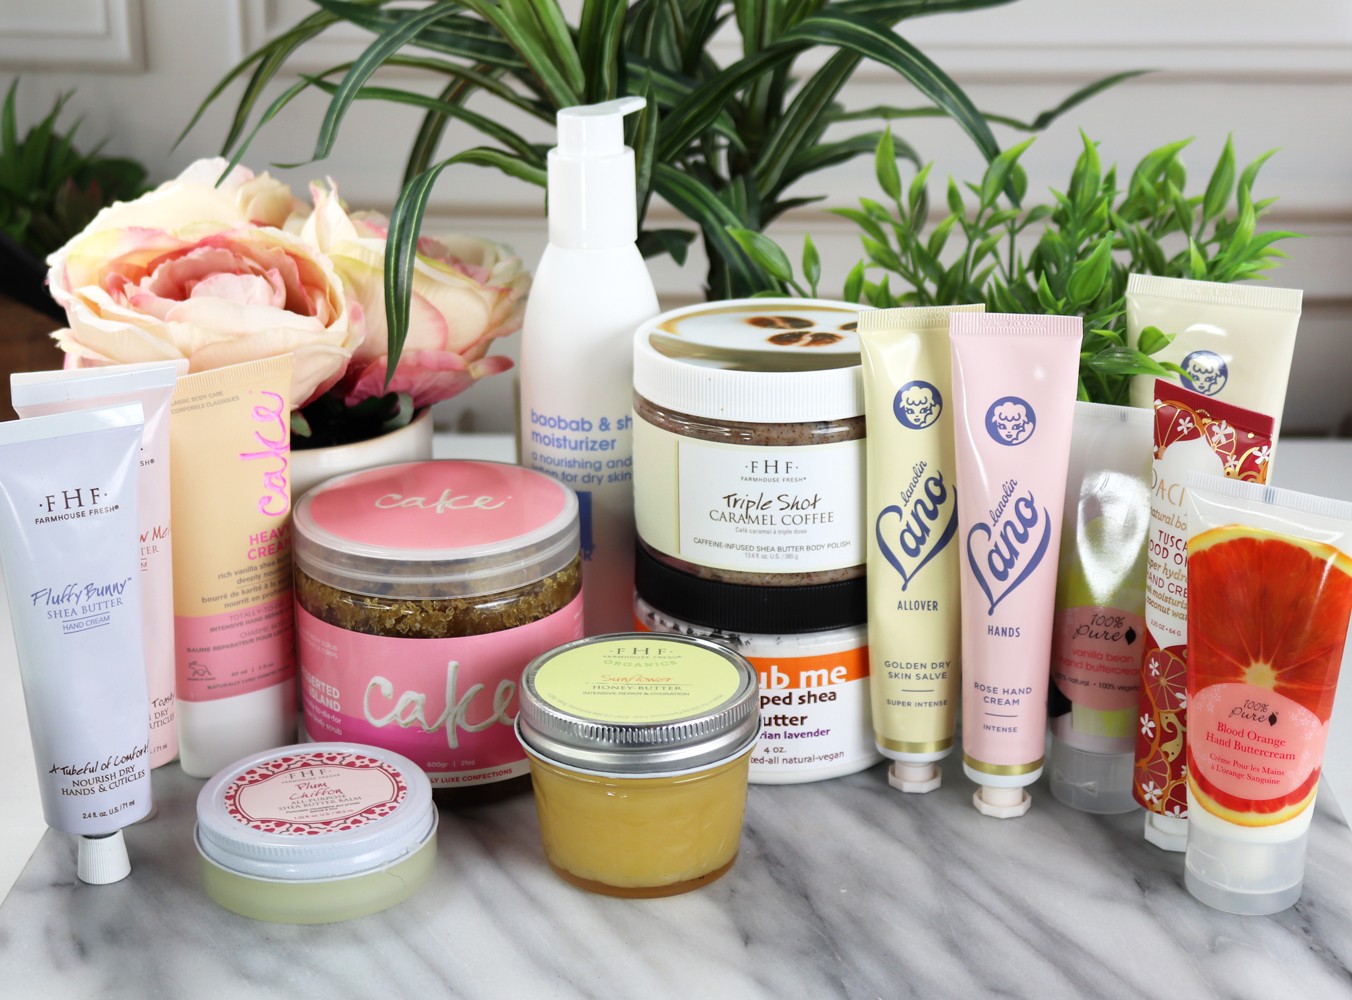 Best cruelty free scrubs and hand creams for dry chapped winter skin - The Best Cruelty Free Hand Creams and Scrubs for Dry Winter Skin by LA cruelty free beauty blogger My Beauty Bunny